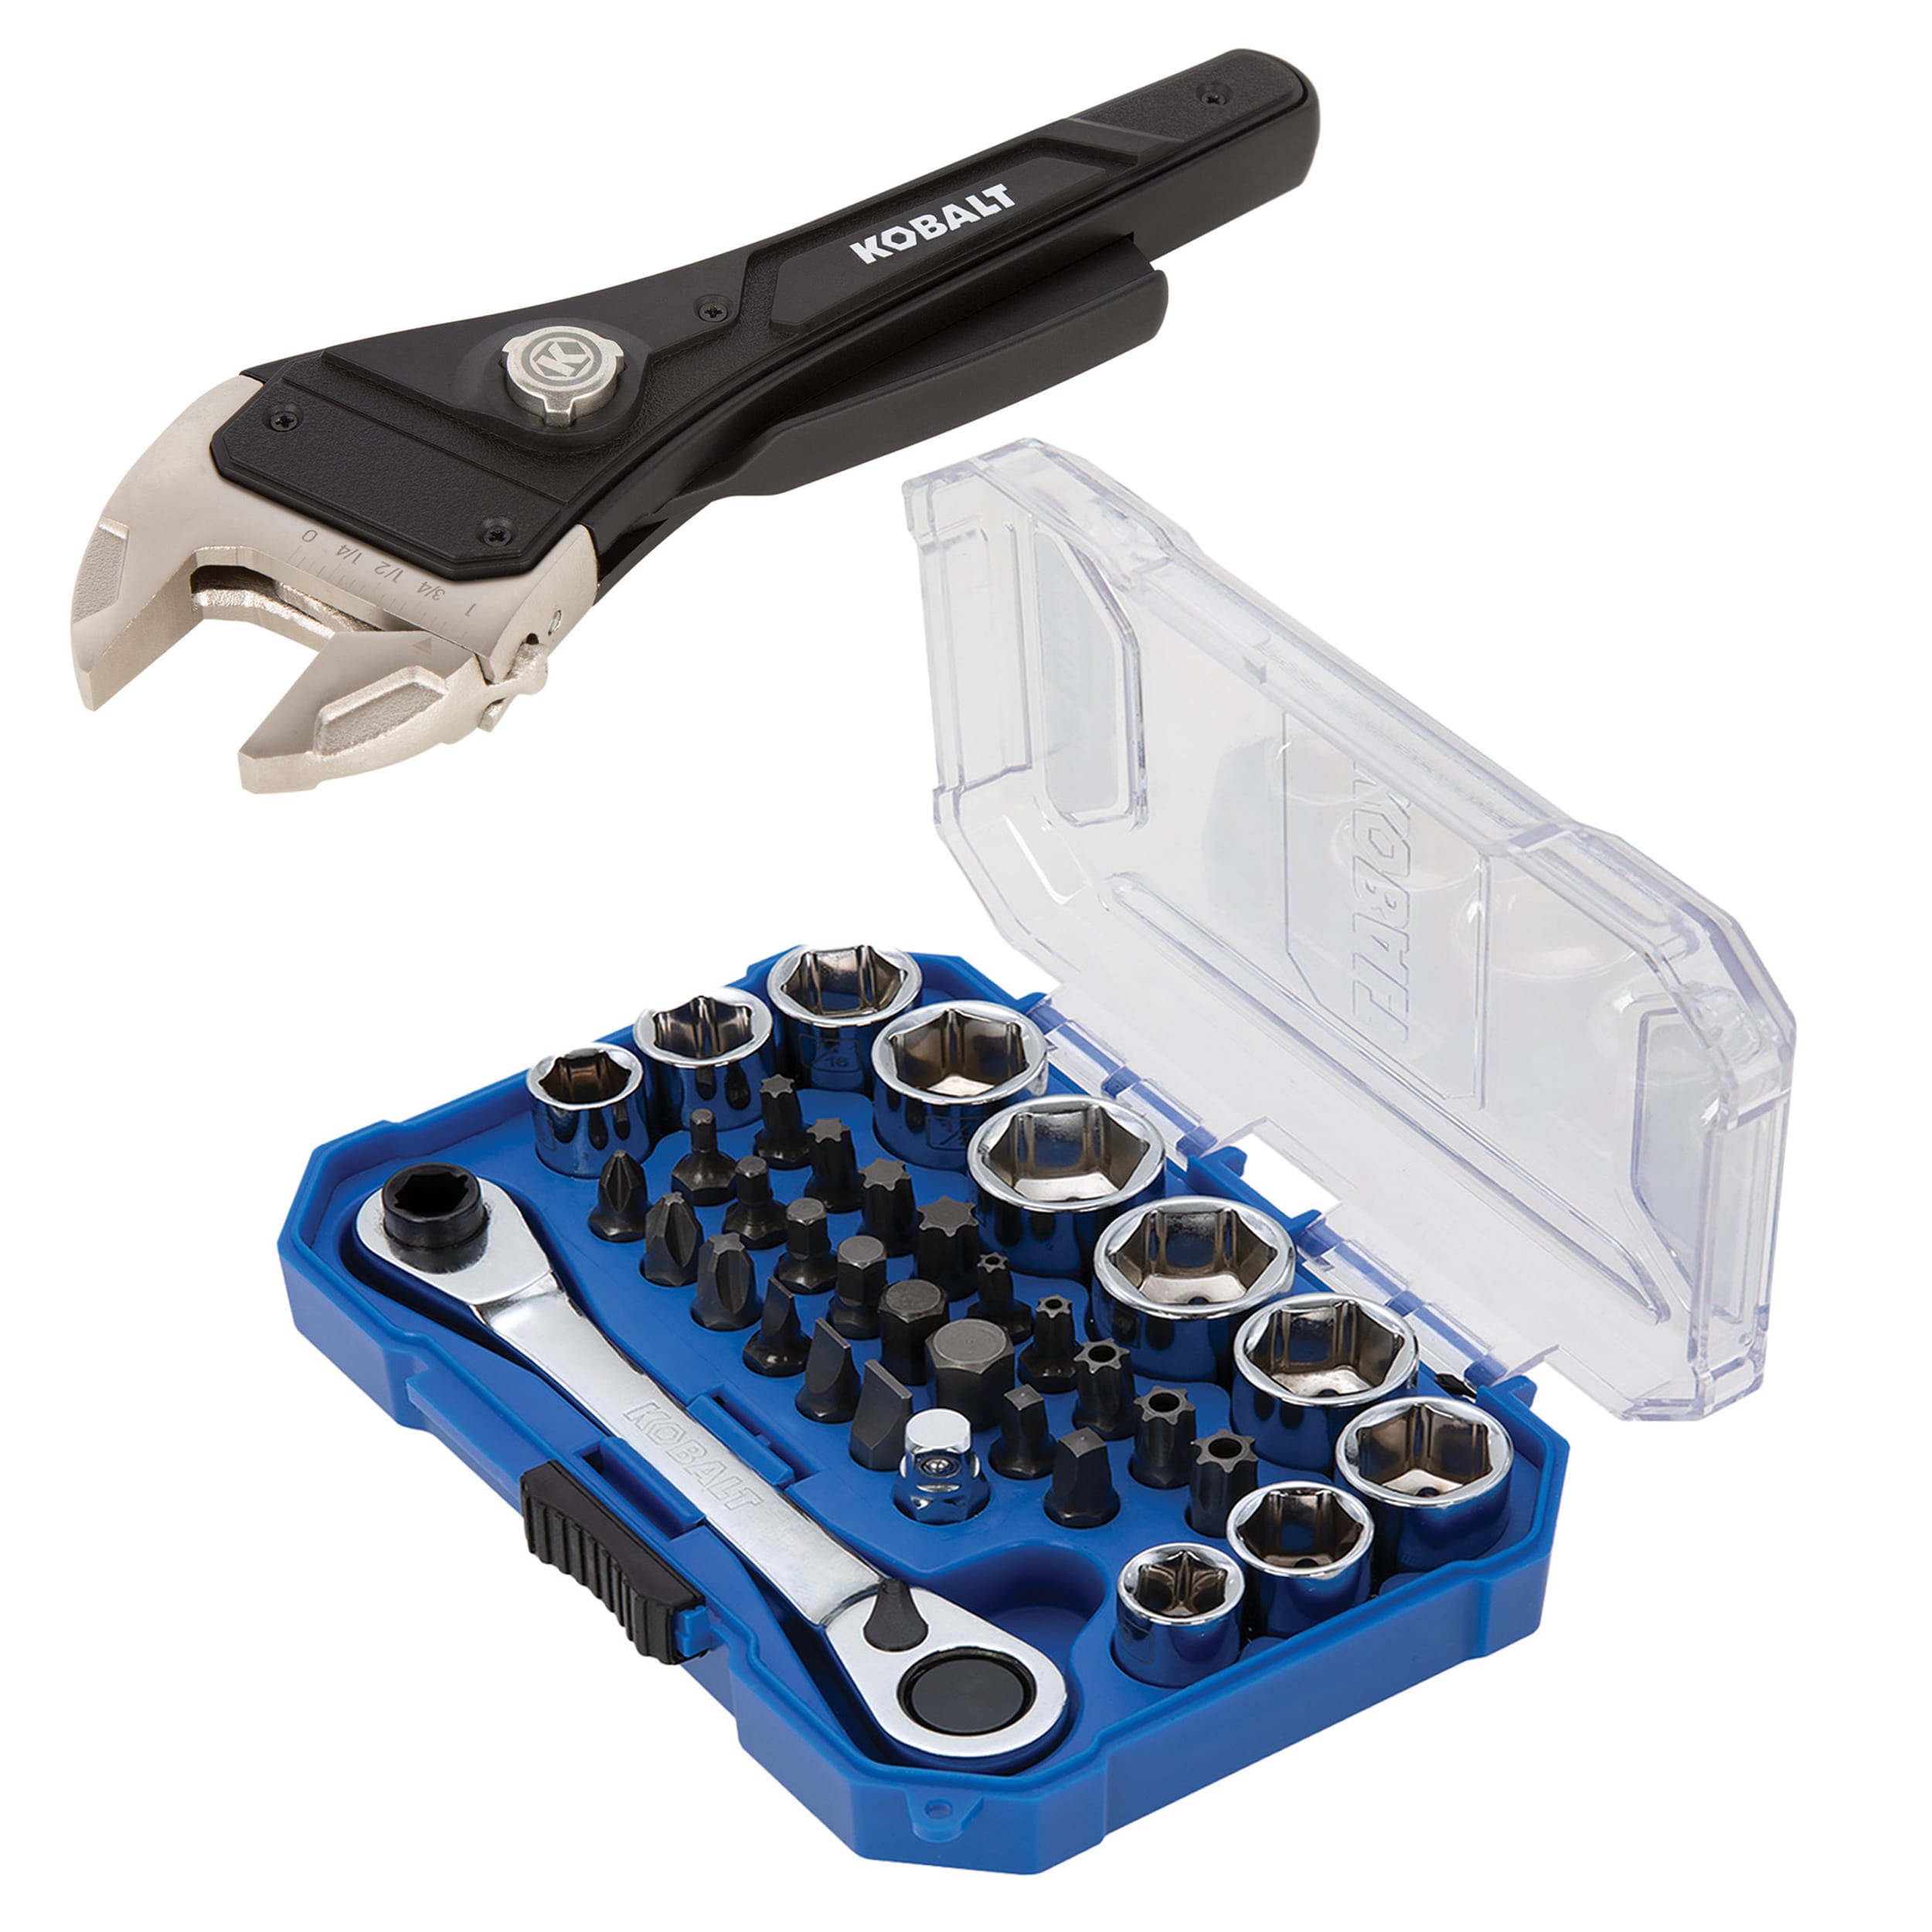 Kobalt 35-Piece in Chrome (SAE) and Polished at Metric Mechanics with Tool Case Tool department Standard Sets Set Combination Mechanics the Hard